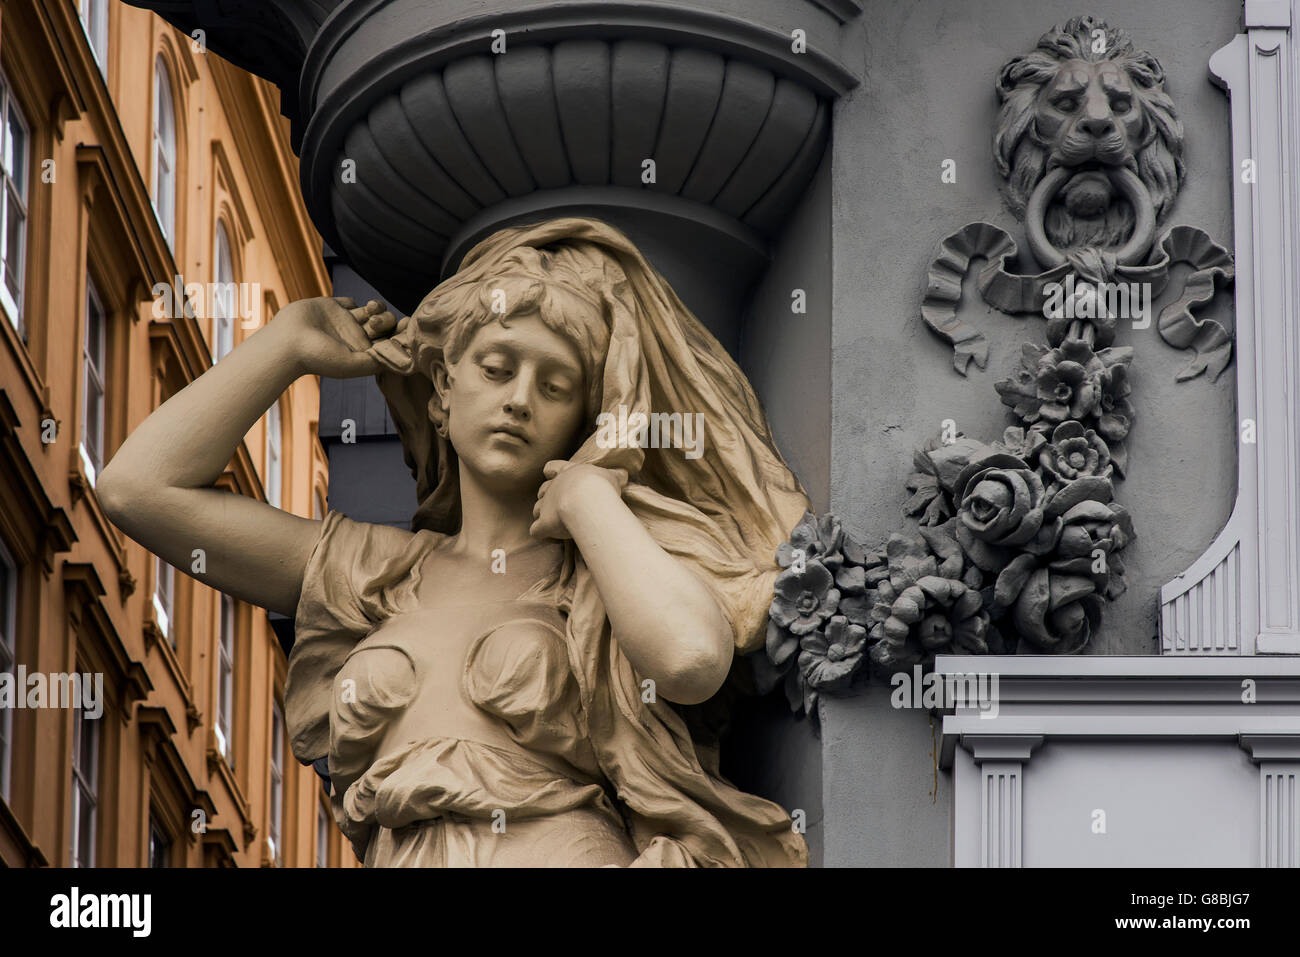 Caryatid sculpted female figure statue on the facade of a building in Graben street, Vienna, Austria Stock Photo